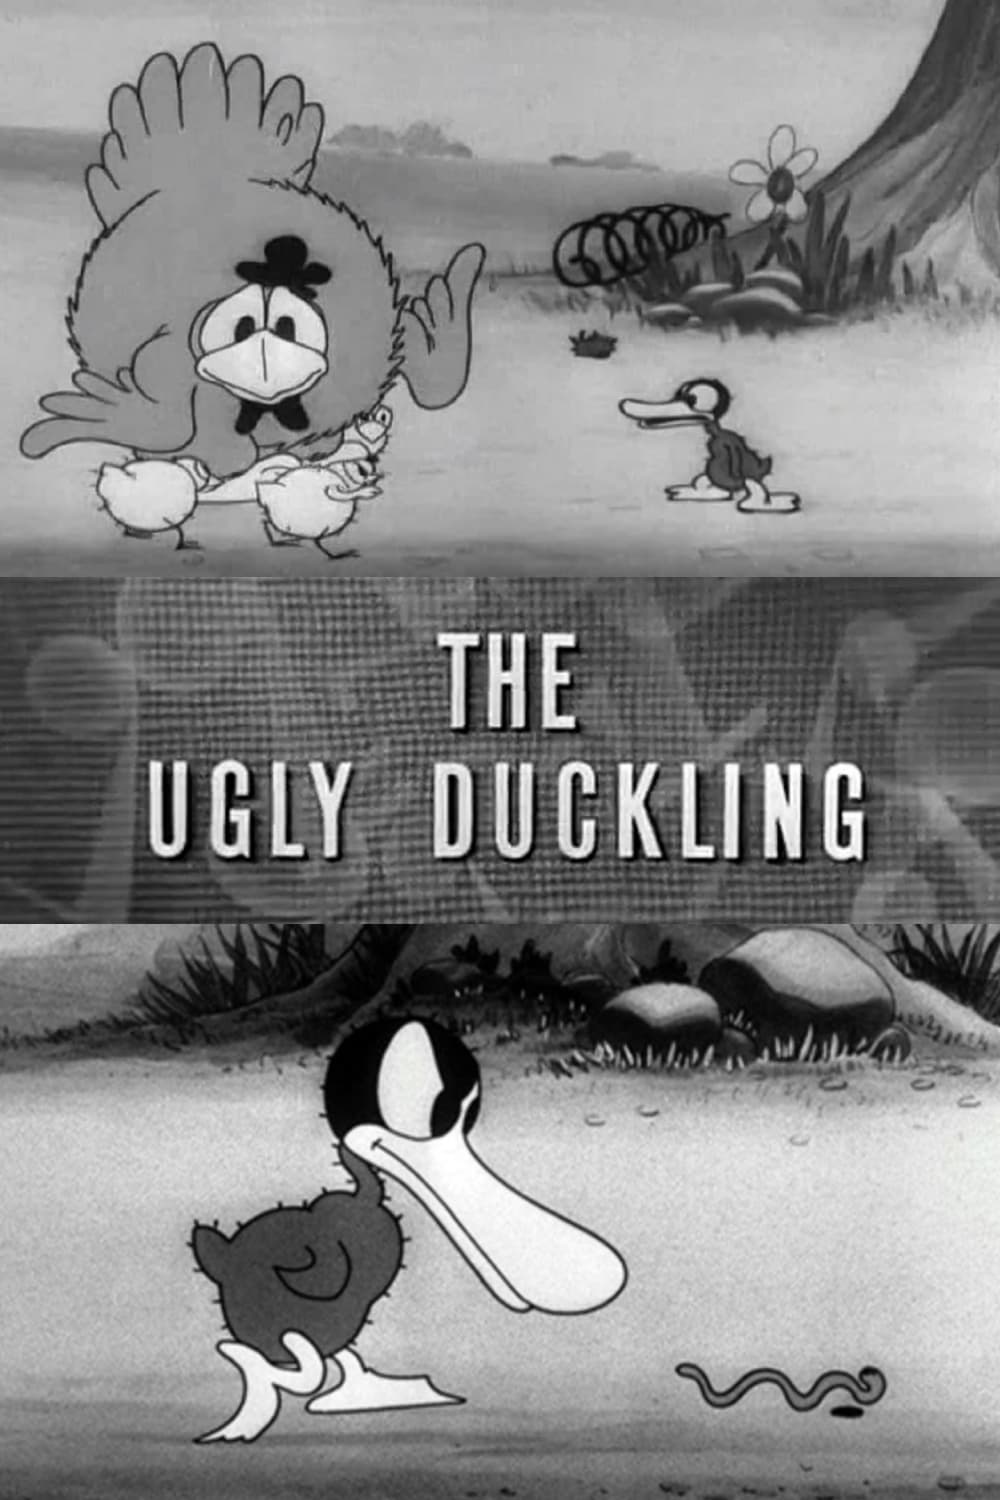 The Ugly Duckling (1931)